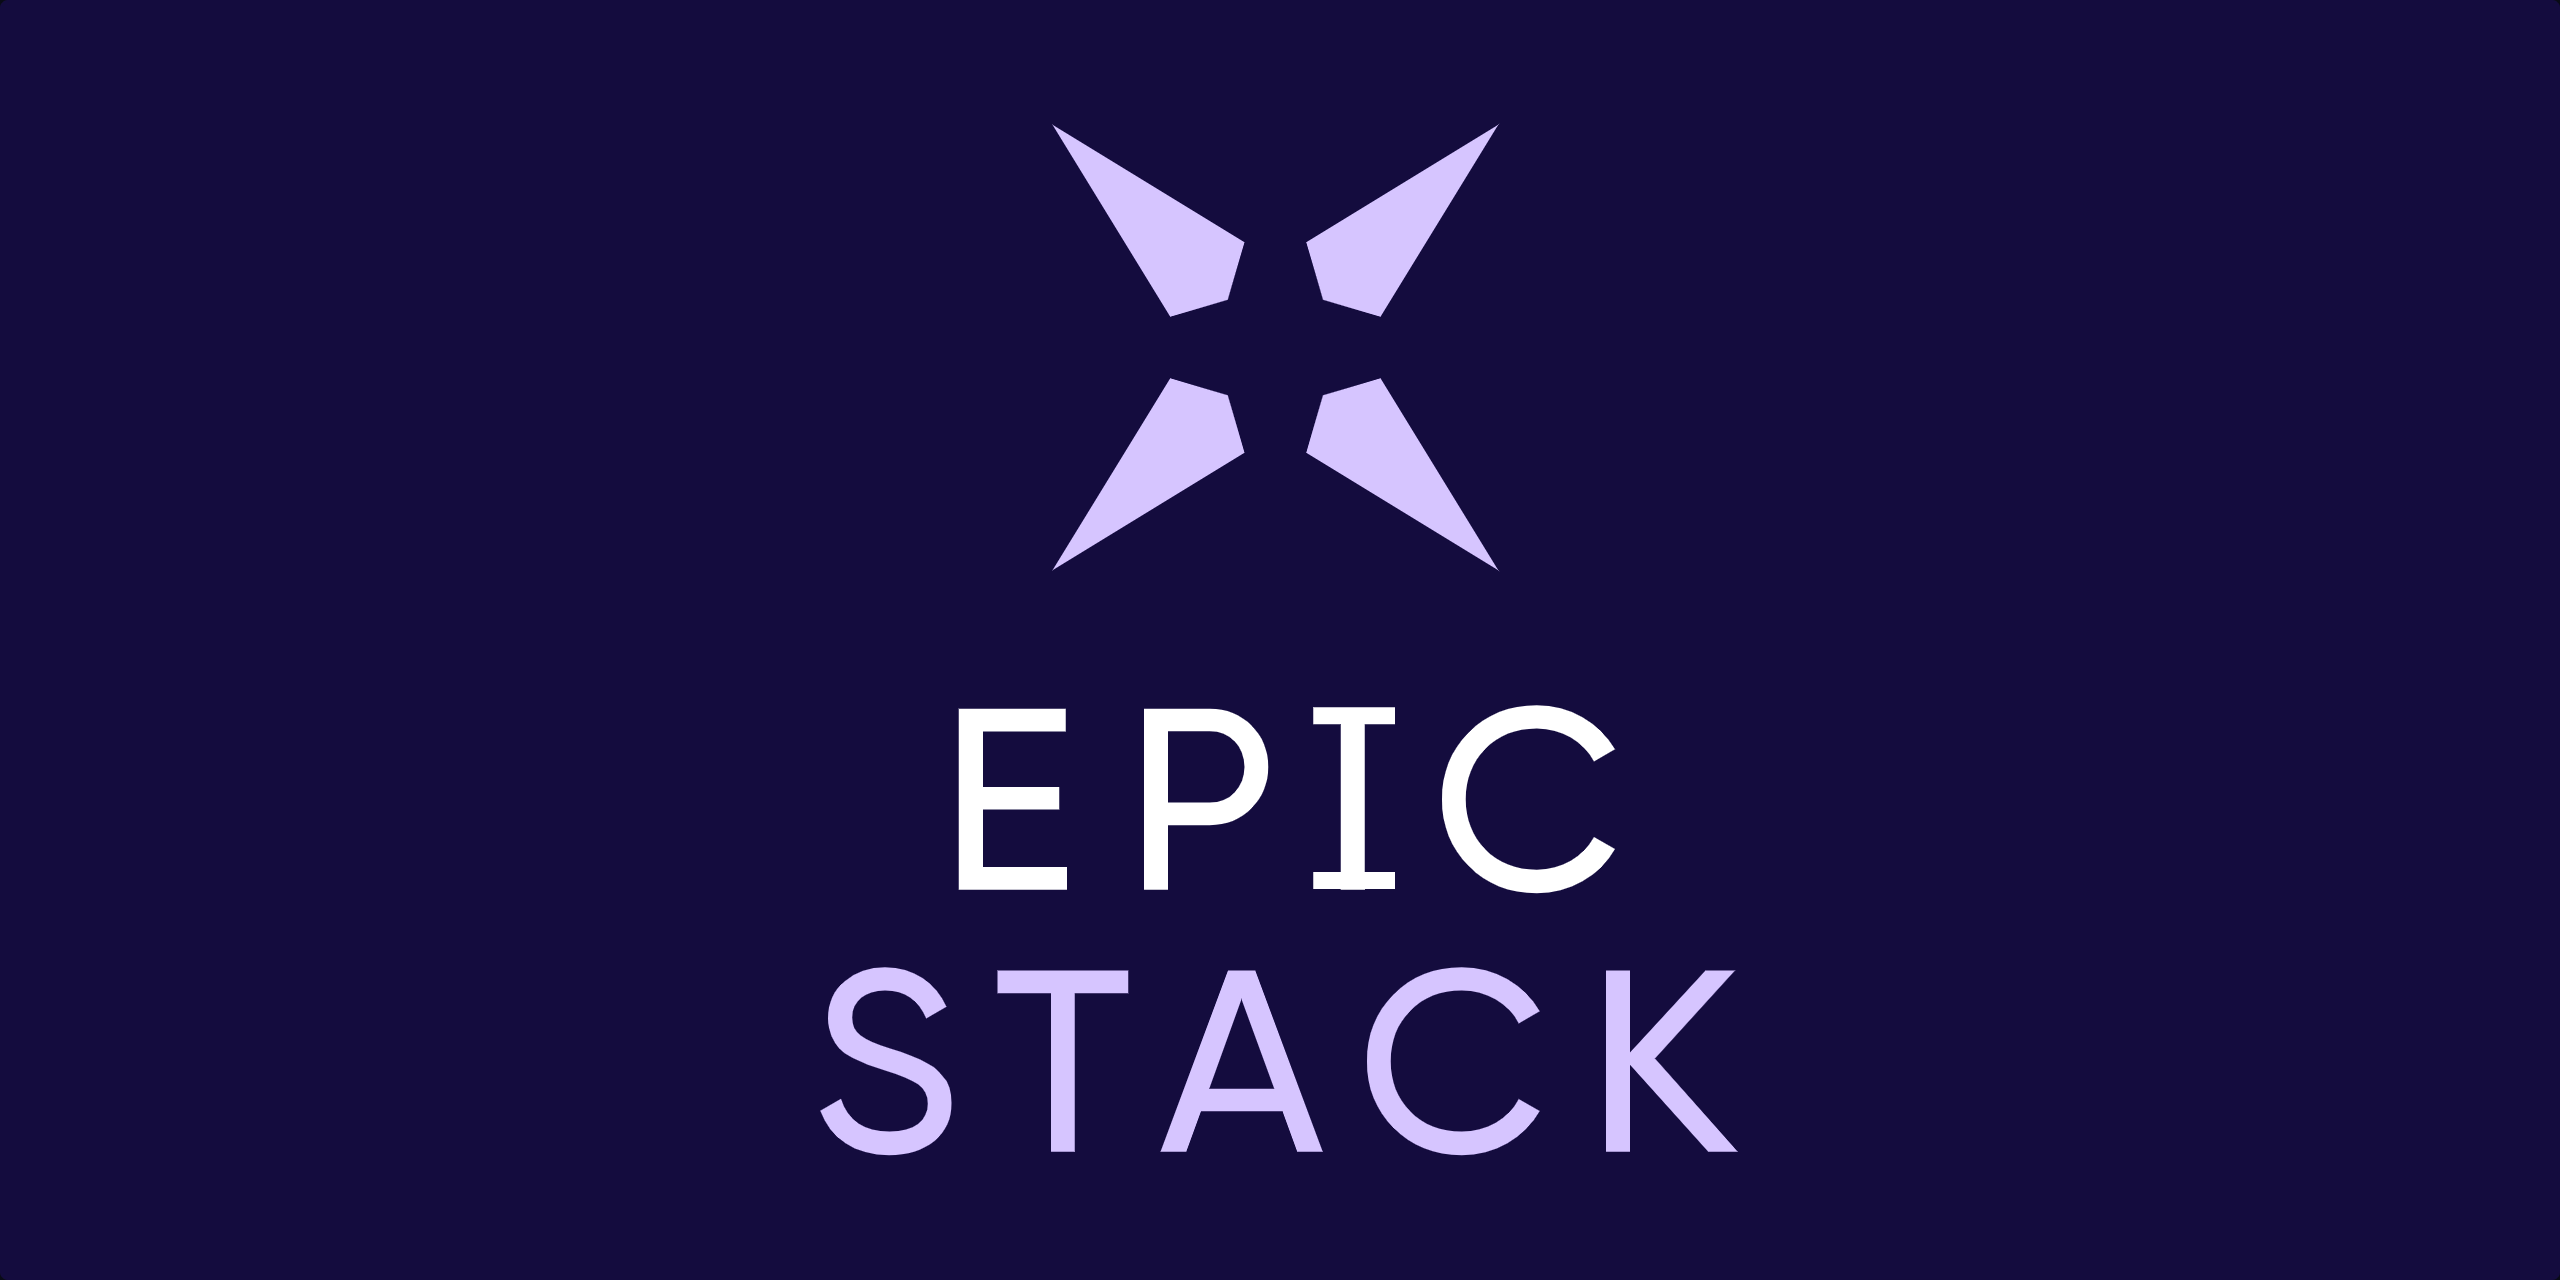 The Epic Stack